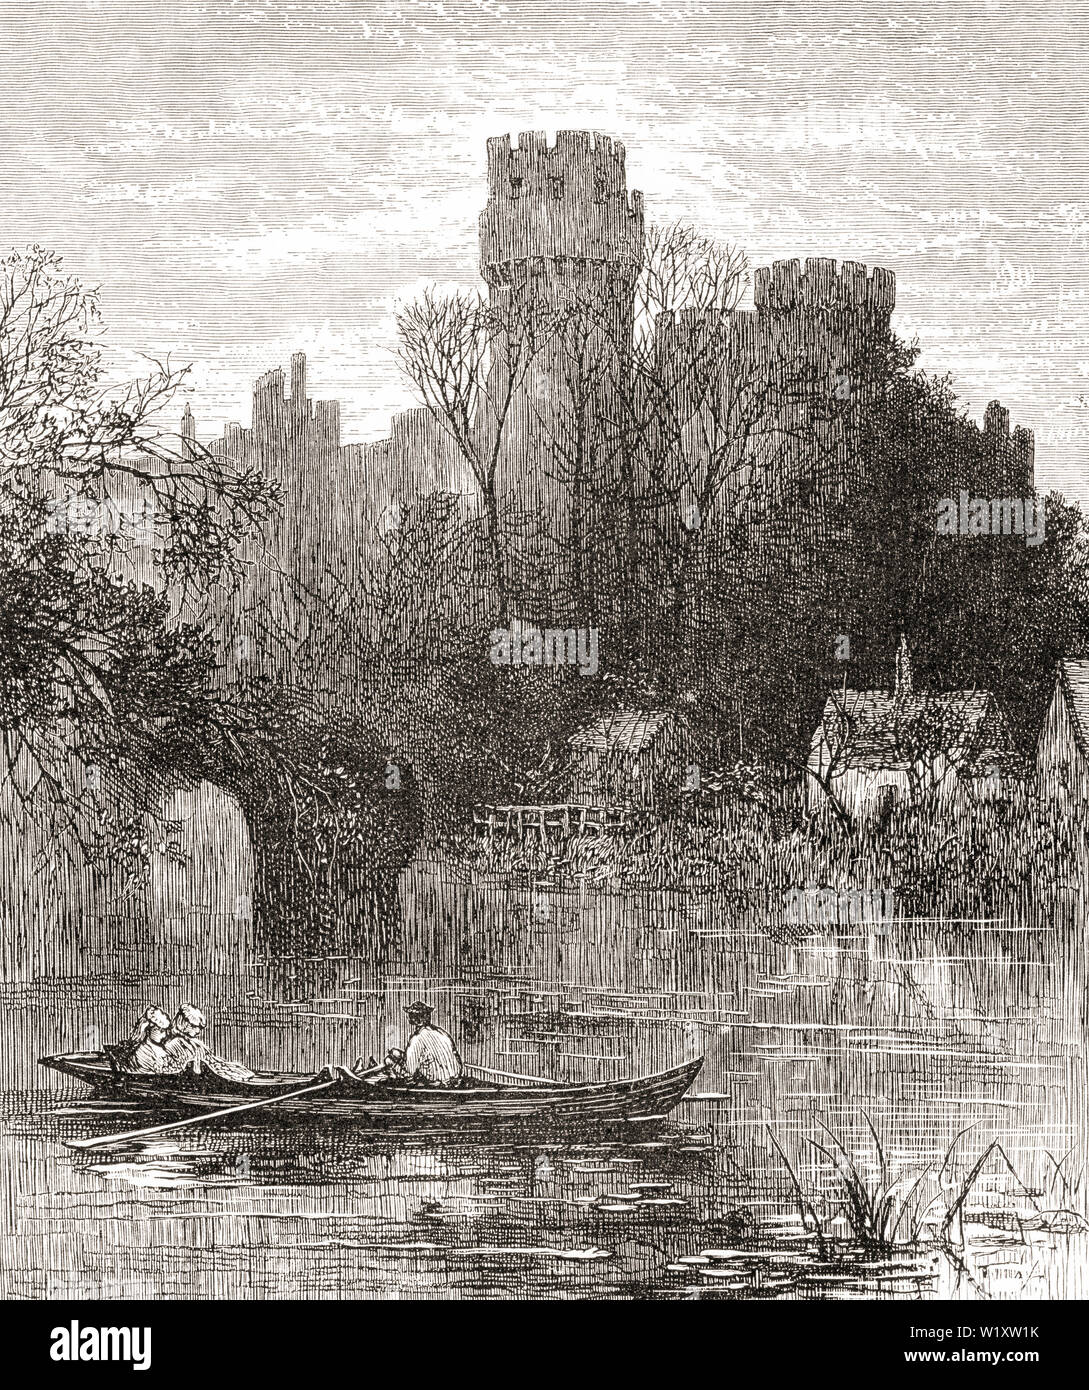 Warwick Castle, Warwick, Warwickshire, England, seen here in the 19th century.  From English Pictures, published 1890. Stock Photo